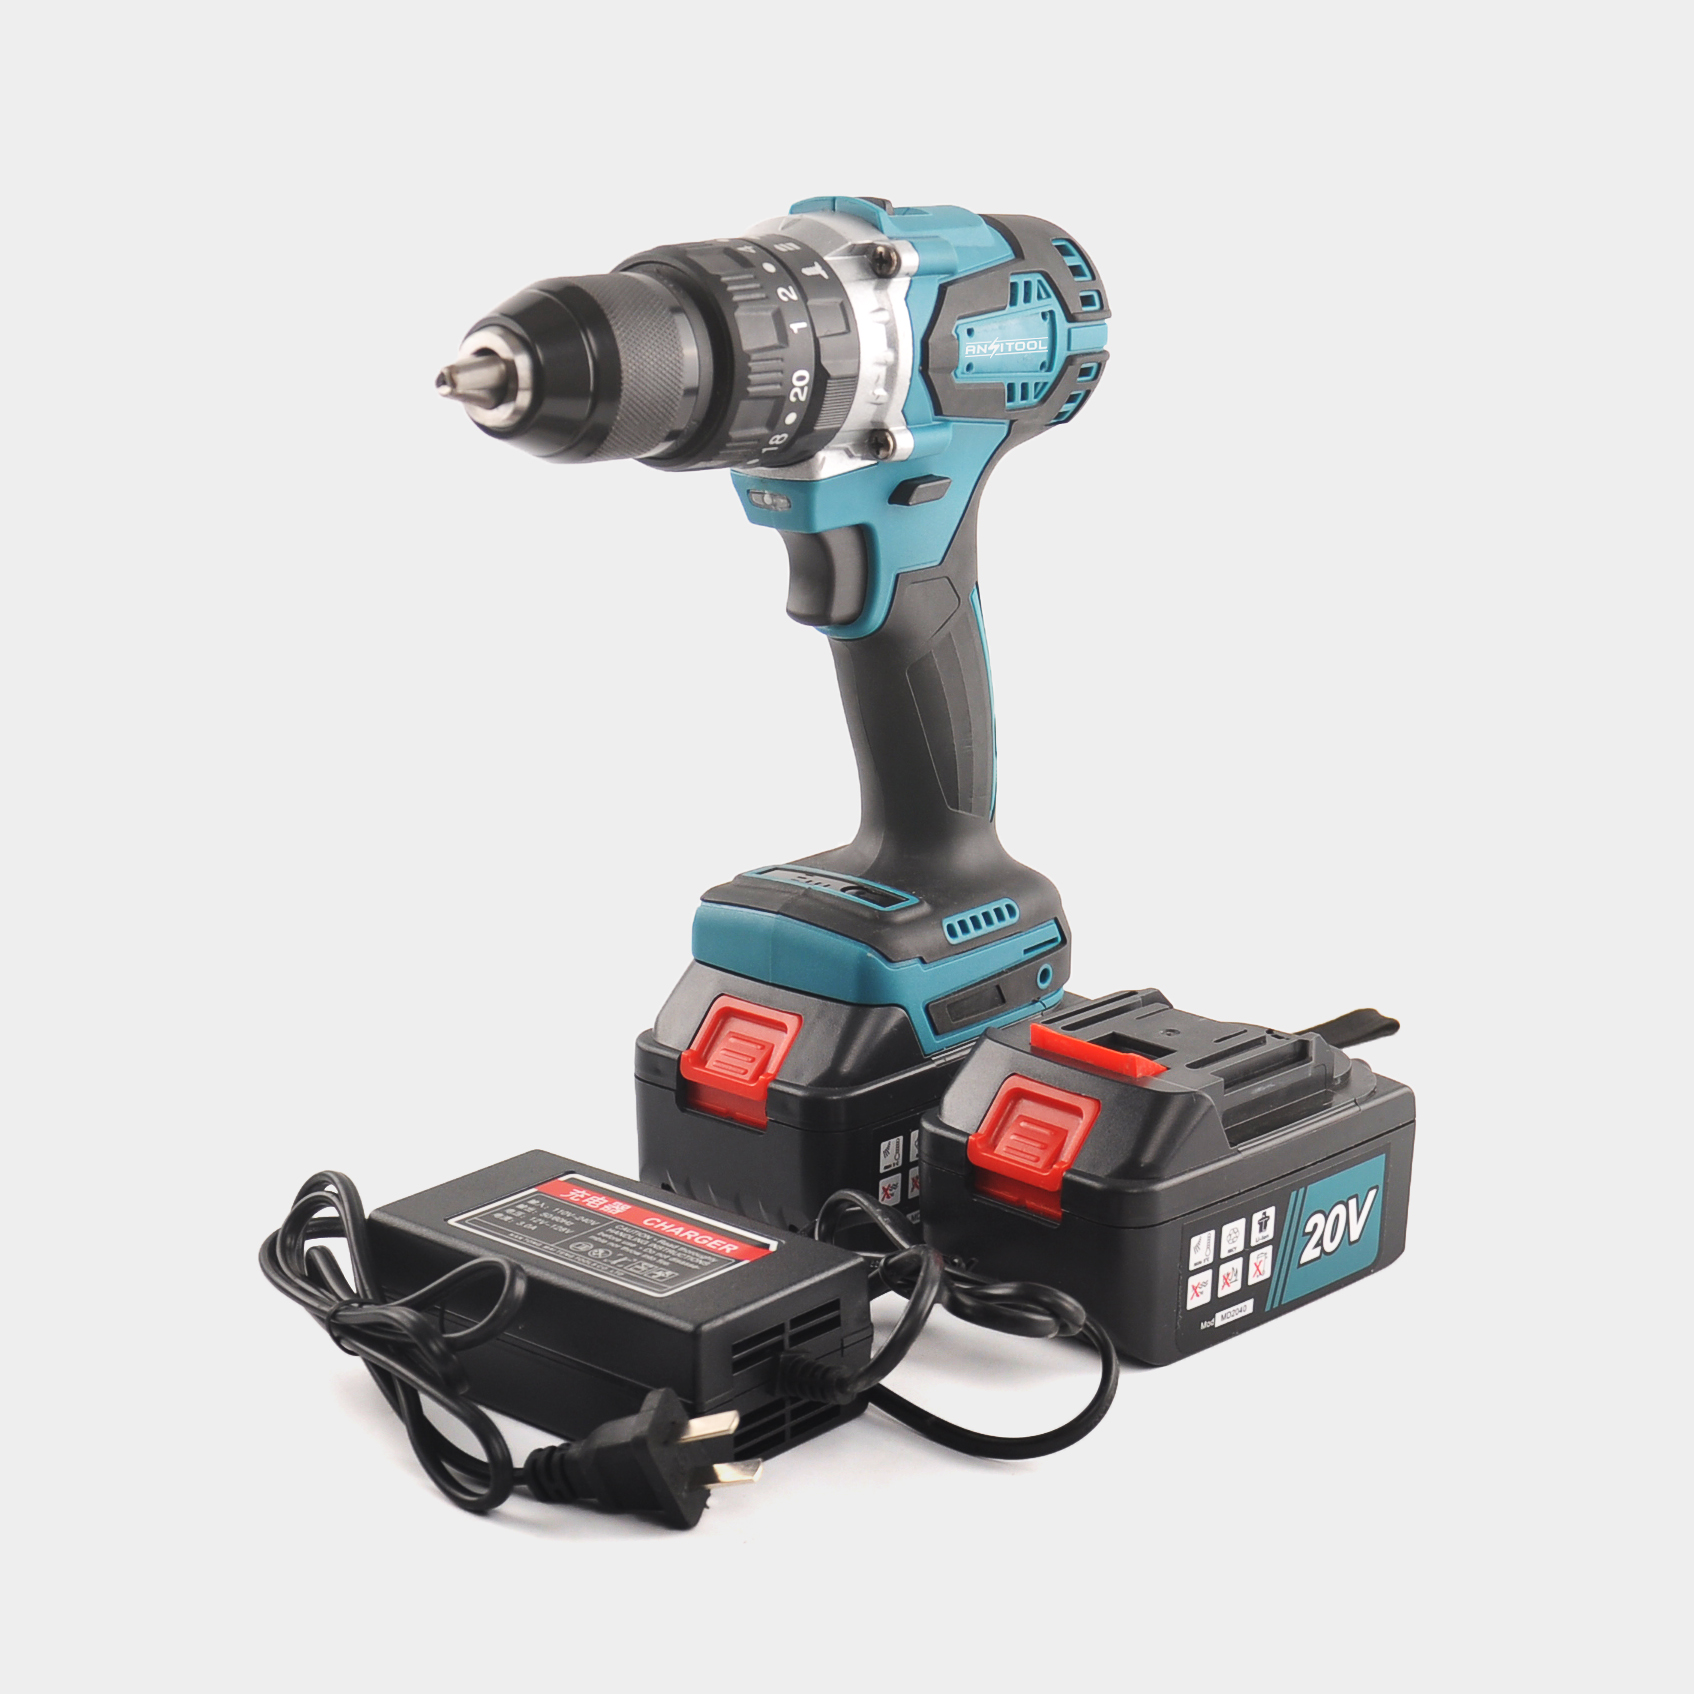 2020 New Design Custom Brushless Cordless Impact Drill Dual Speed Power Hand Drill With 20V Lithium Battery